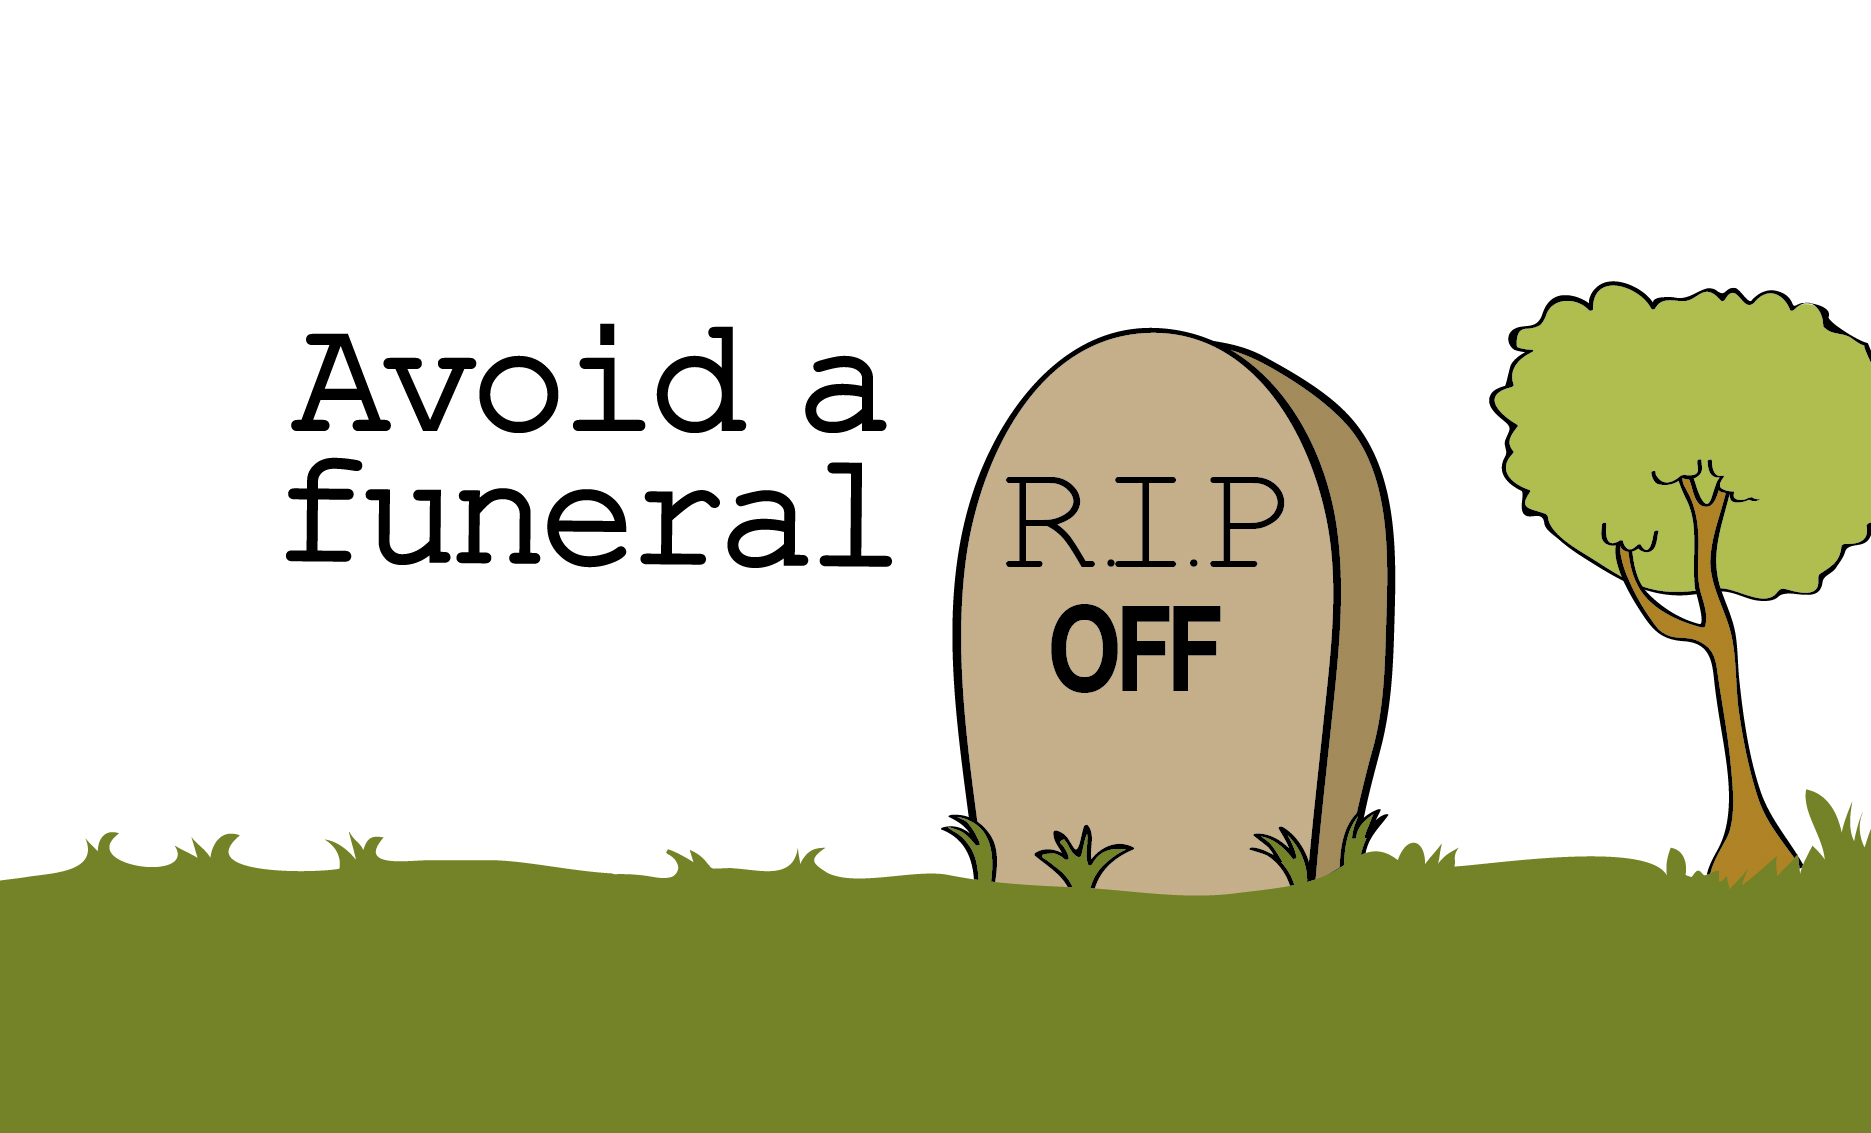 Funeral RIP-off campaign image.jpg